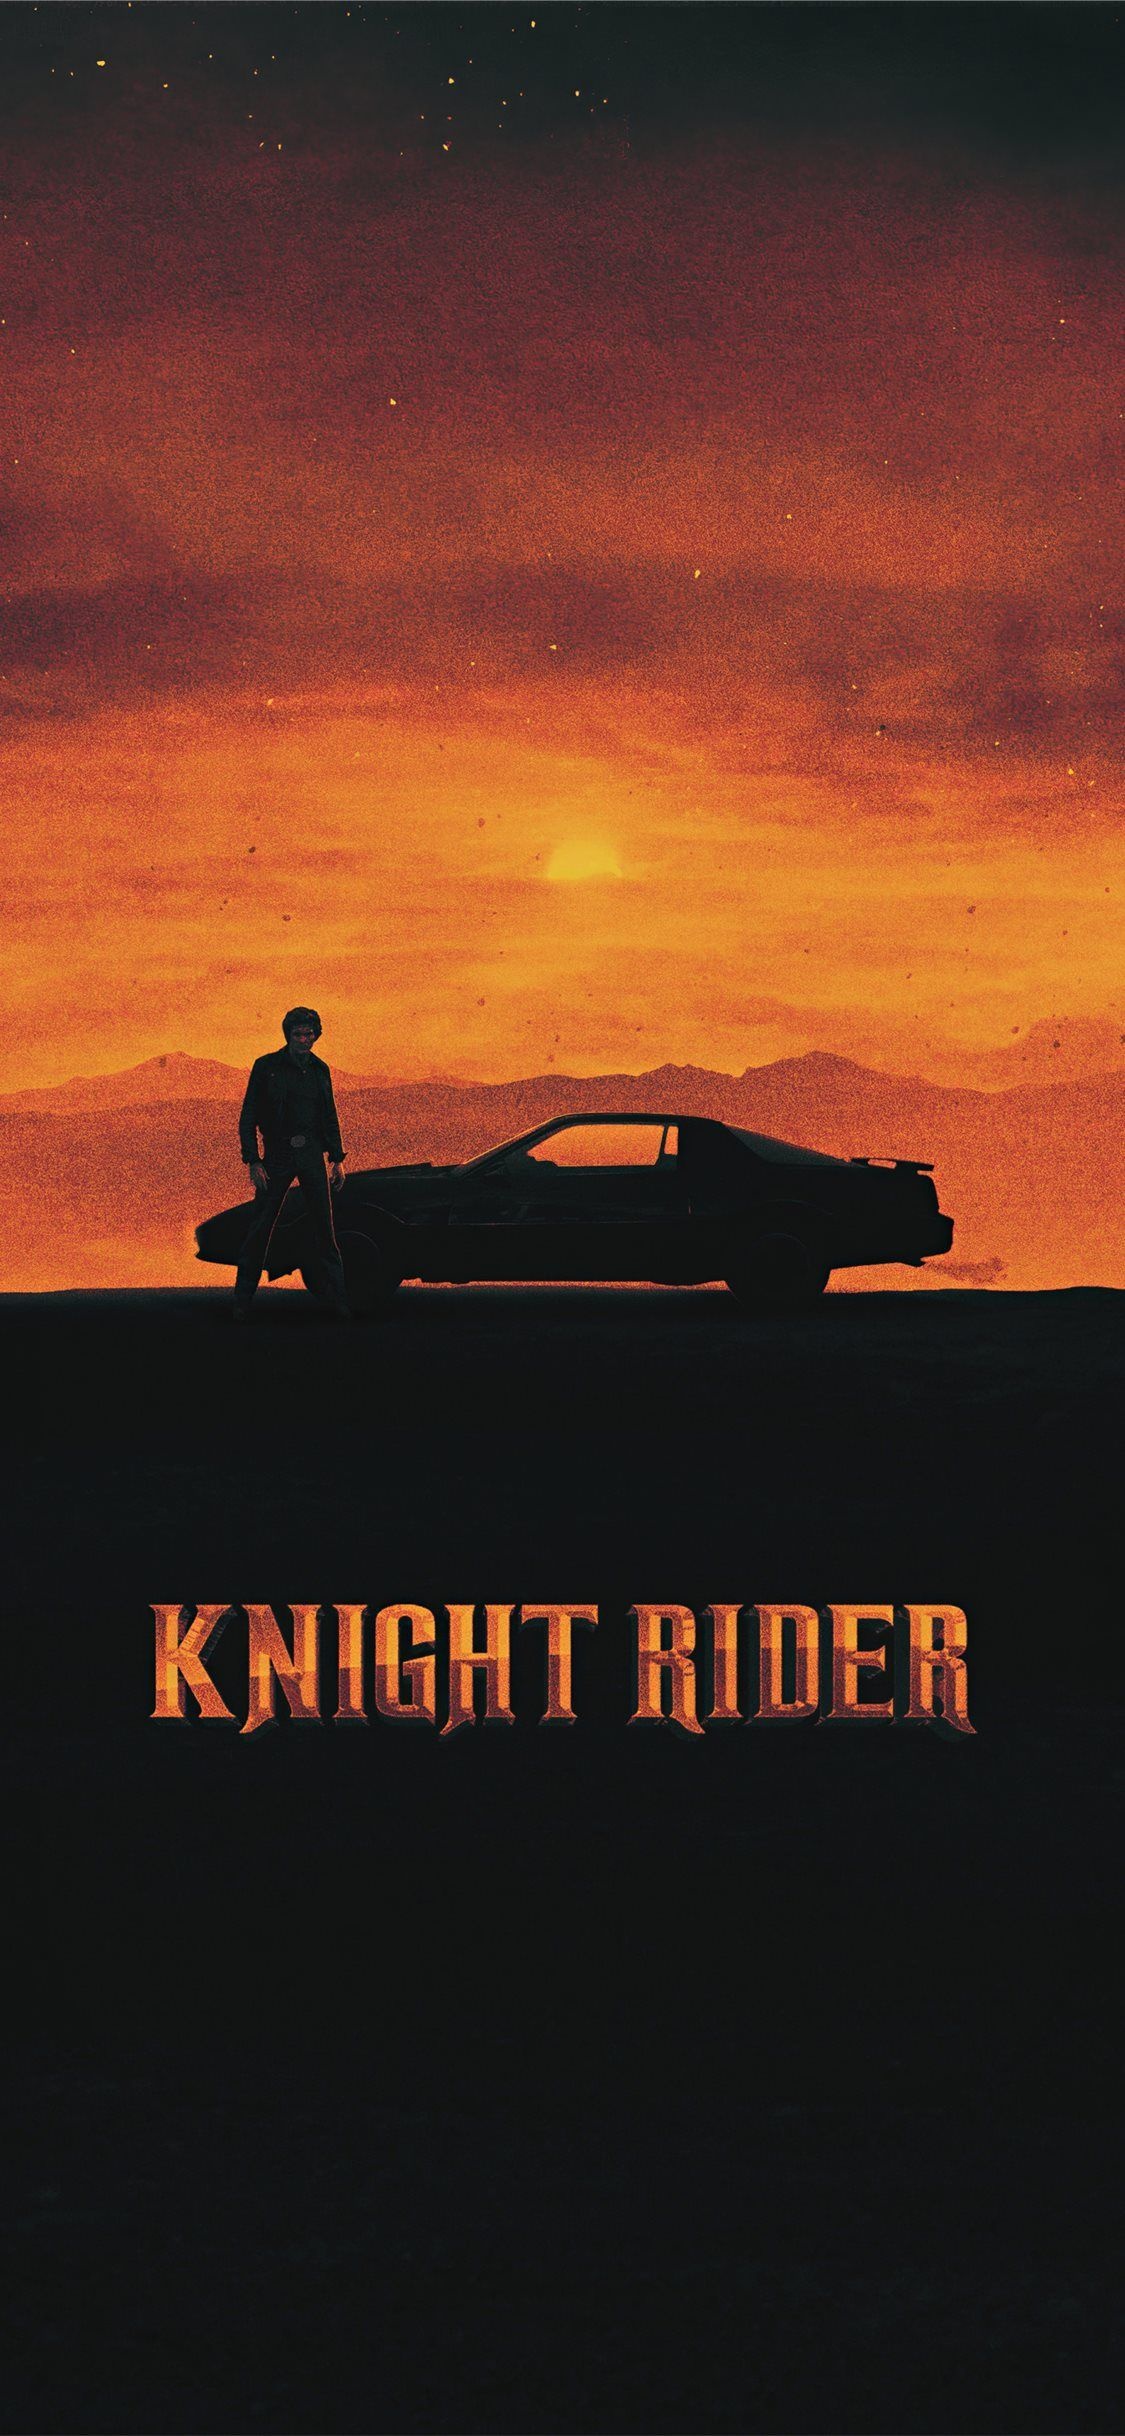 Knight Rider TV series, Knight Rider iPhone wallpapers, Free backgrounds, 1130x2440 HD Phone